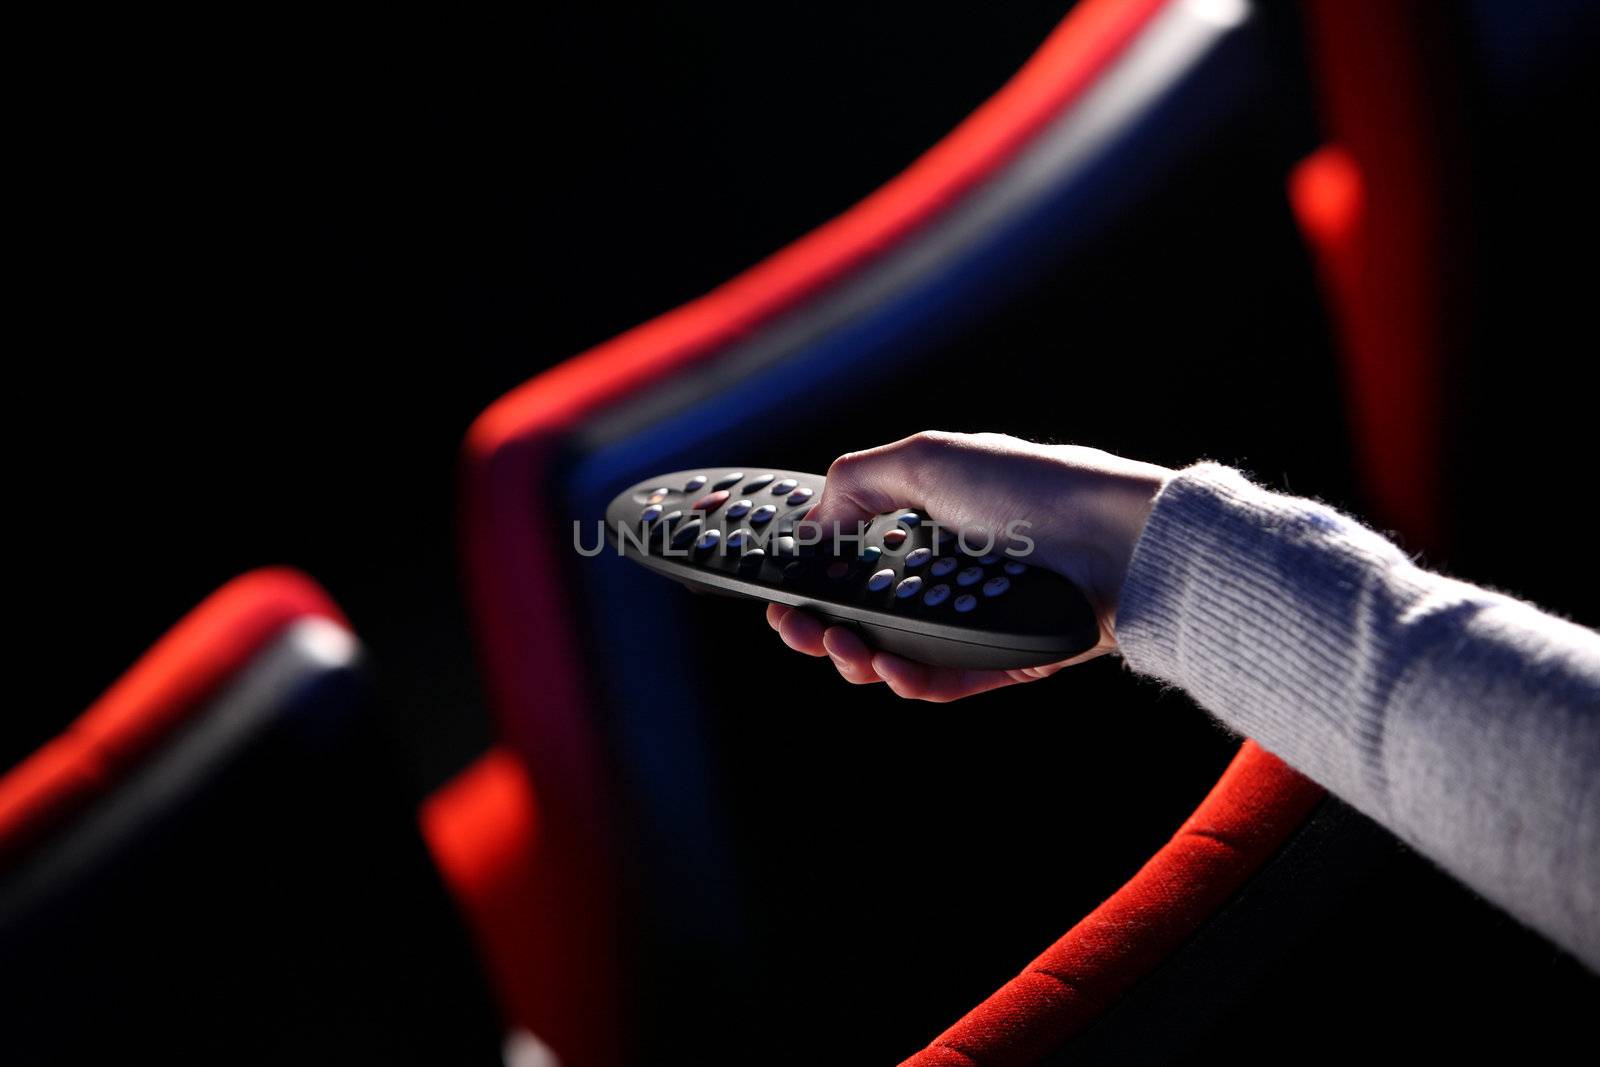 closeup of a hand holding a remote control TV, in the background you can see the red chairs in a movie theater. conceptual image